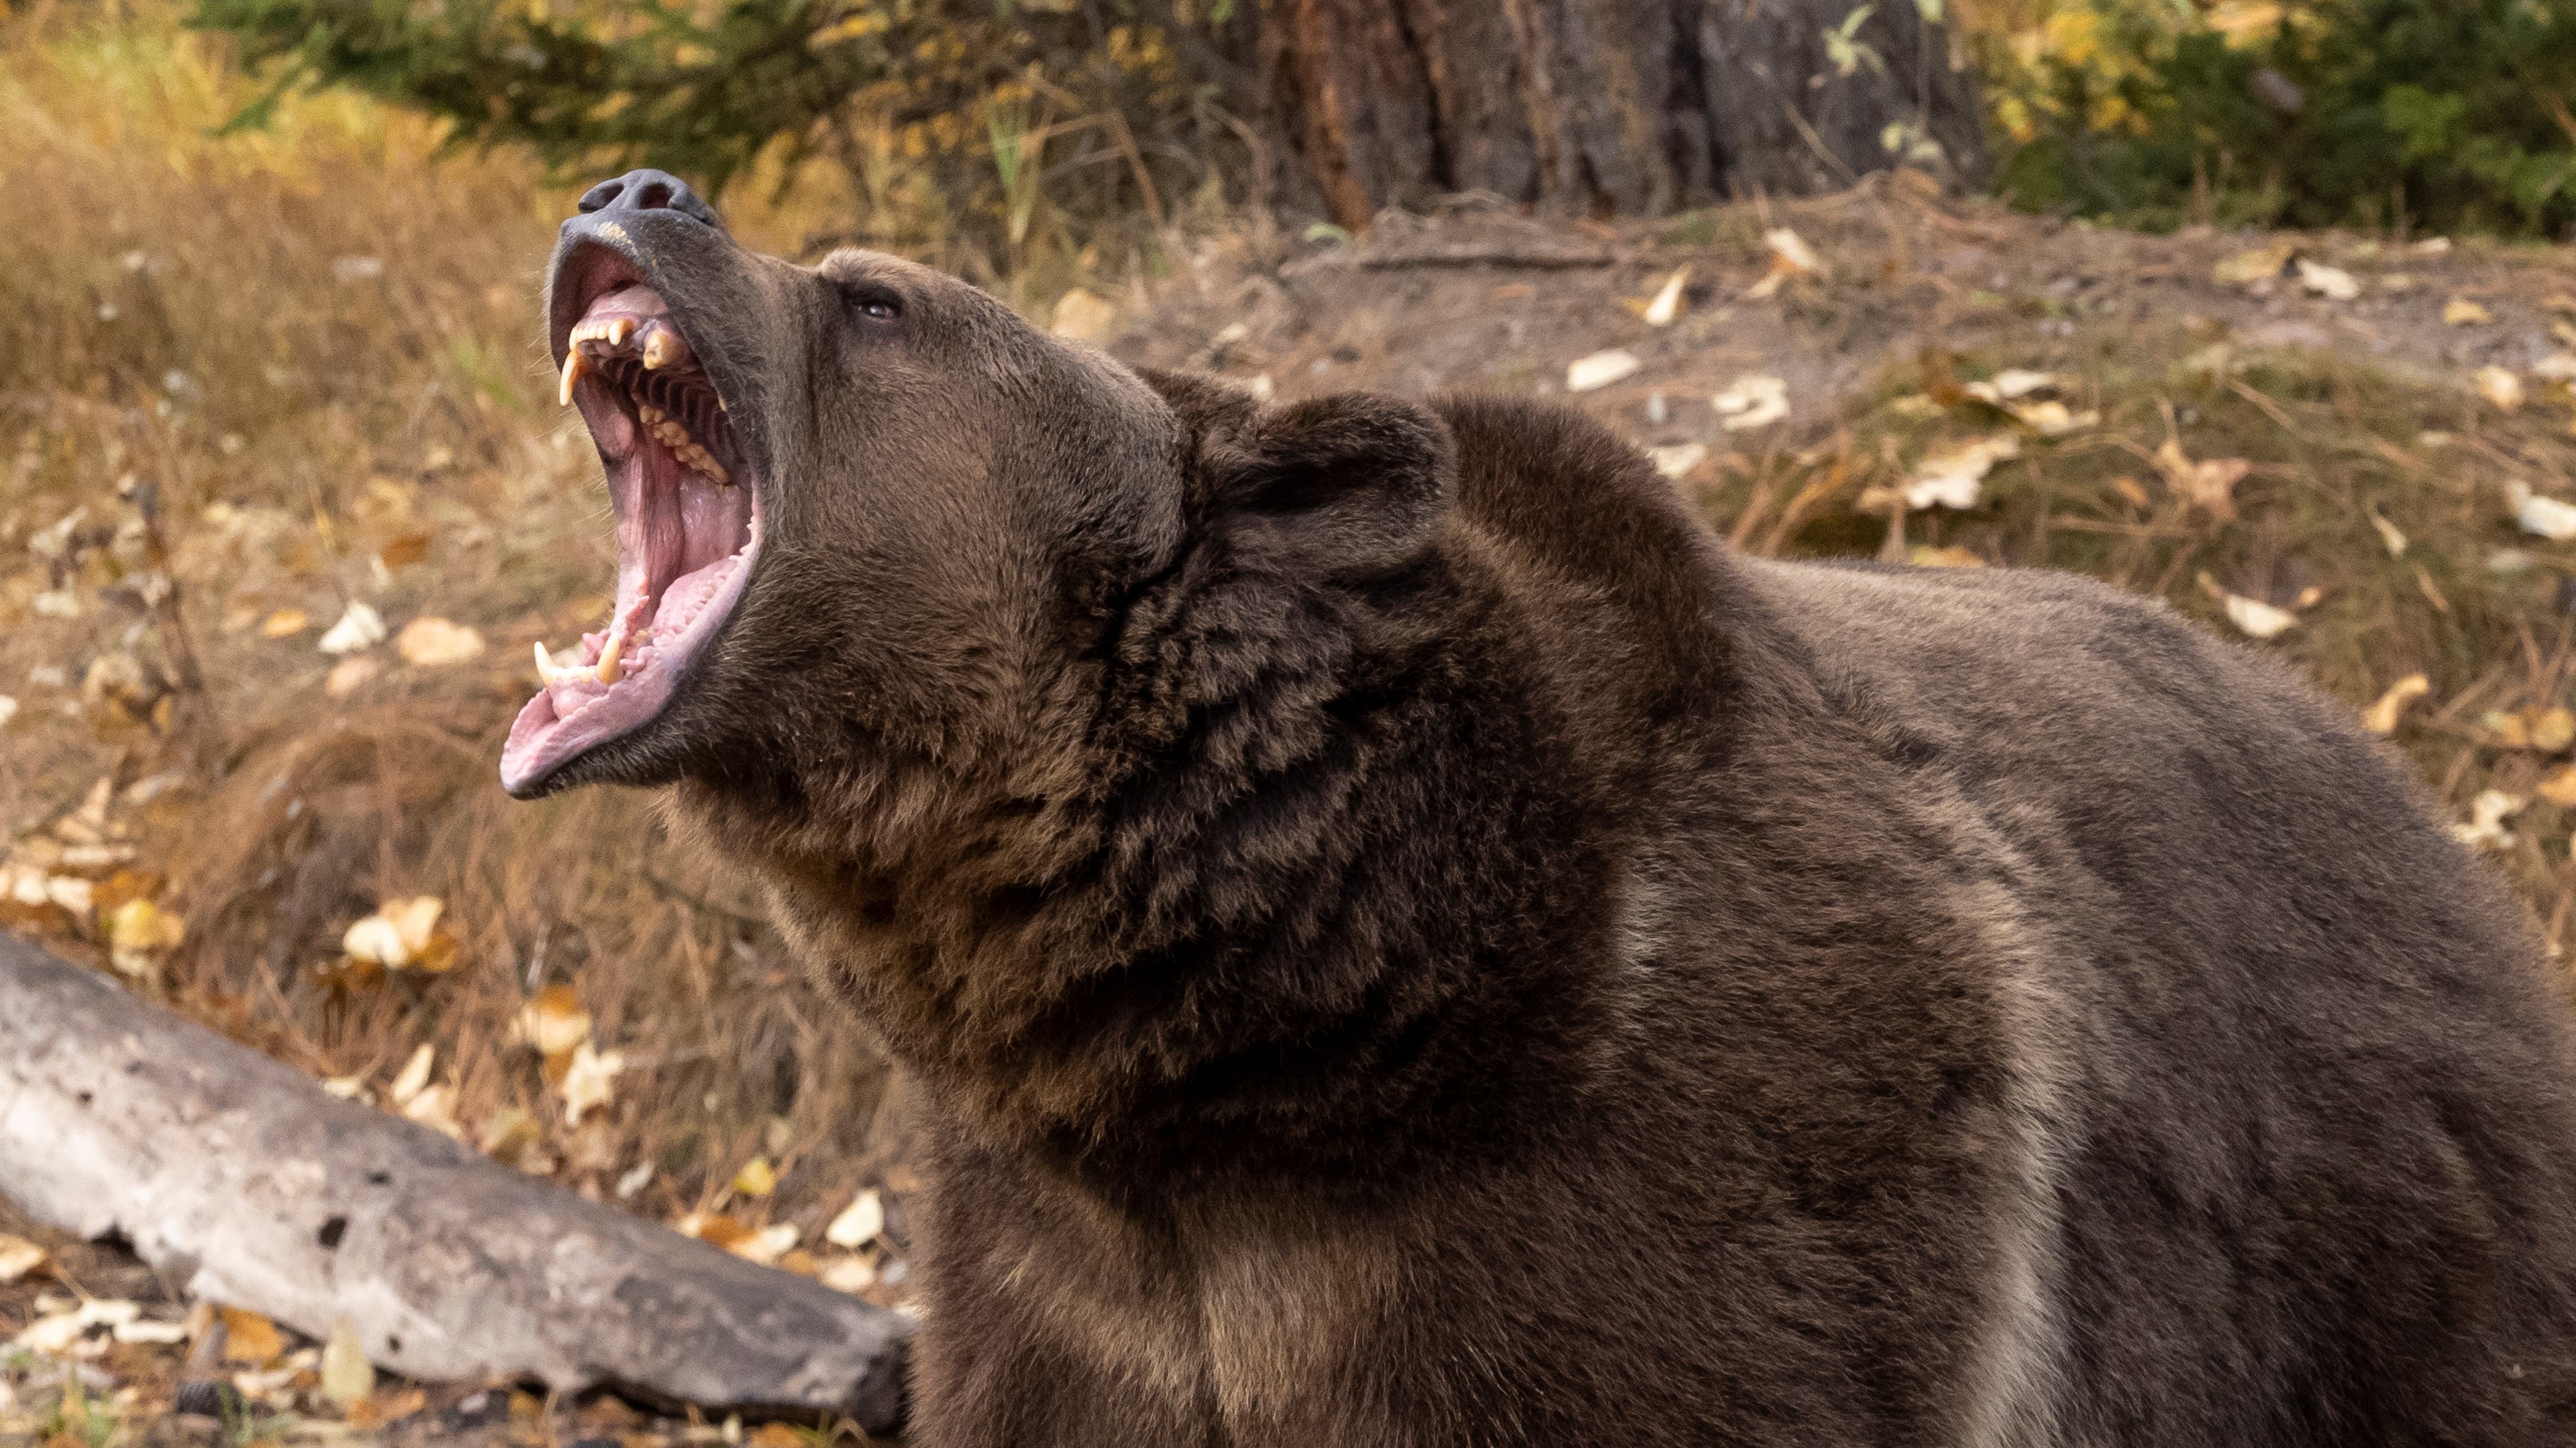 a grizzly bear roaring in an autumn setting